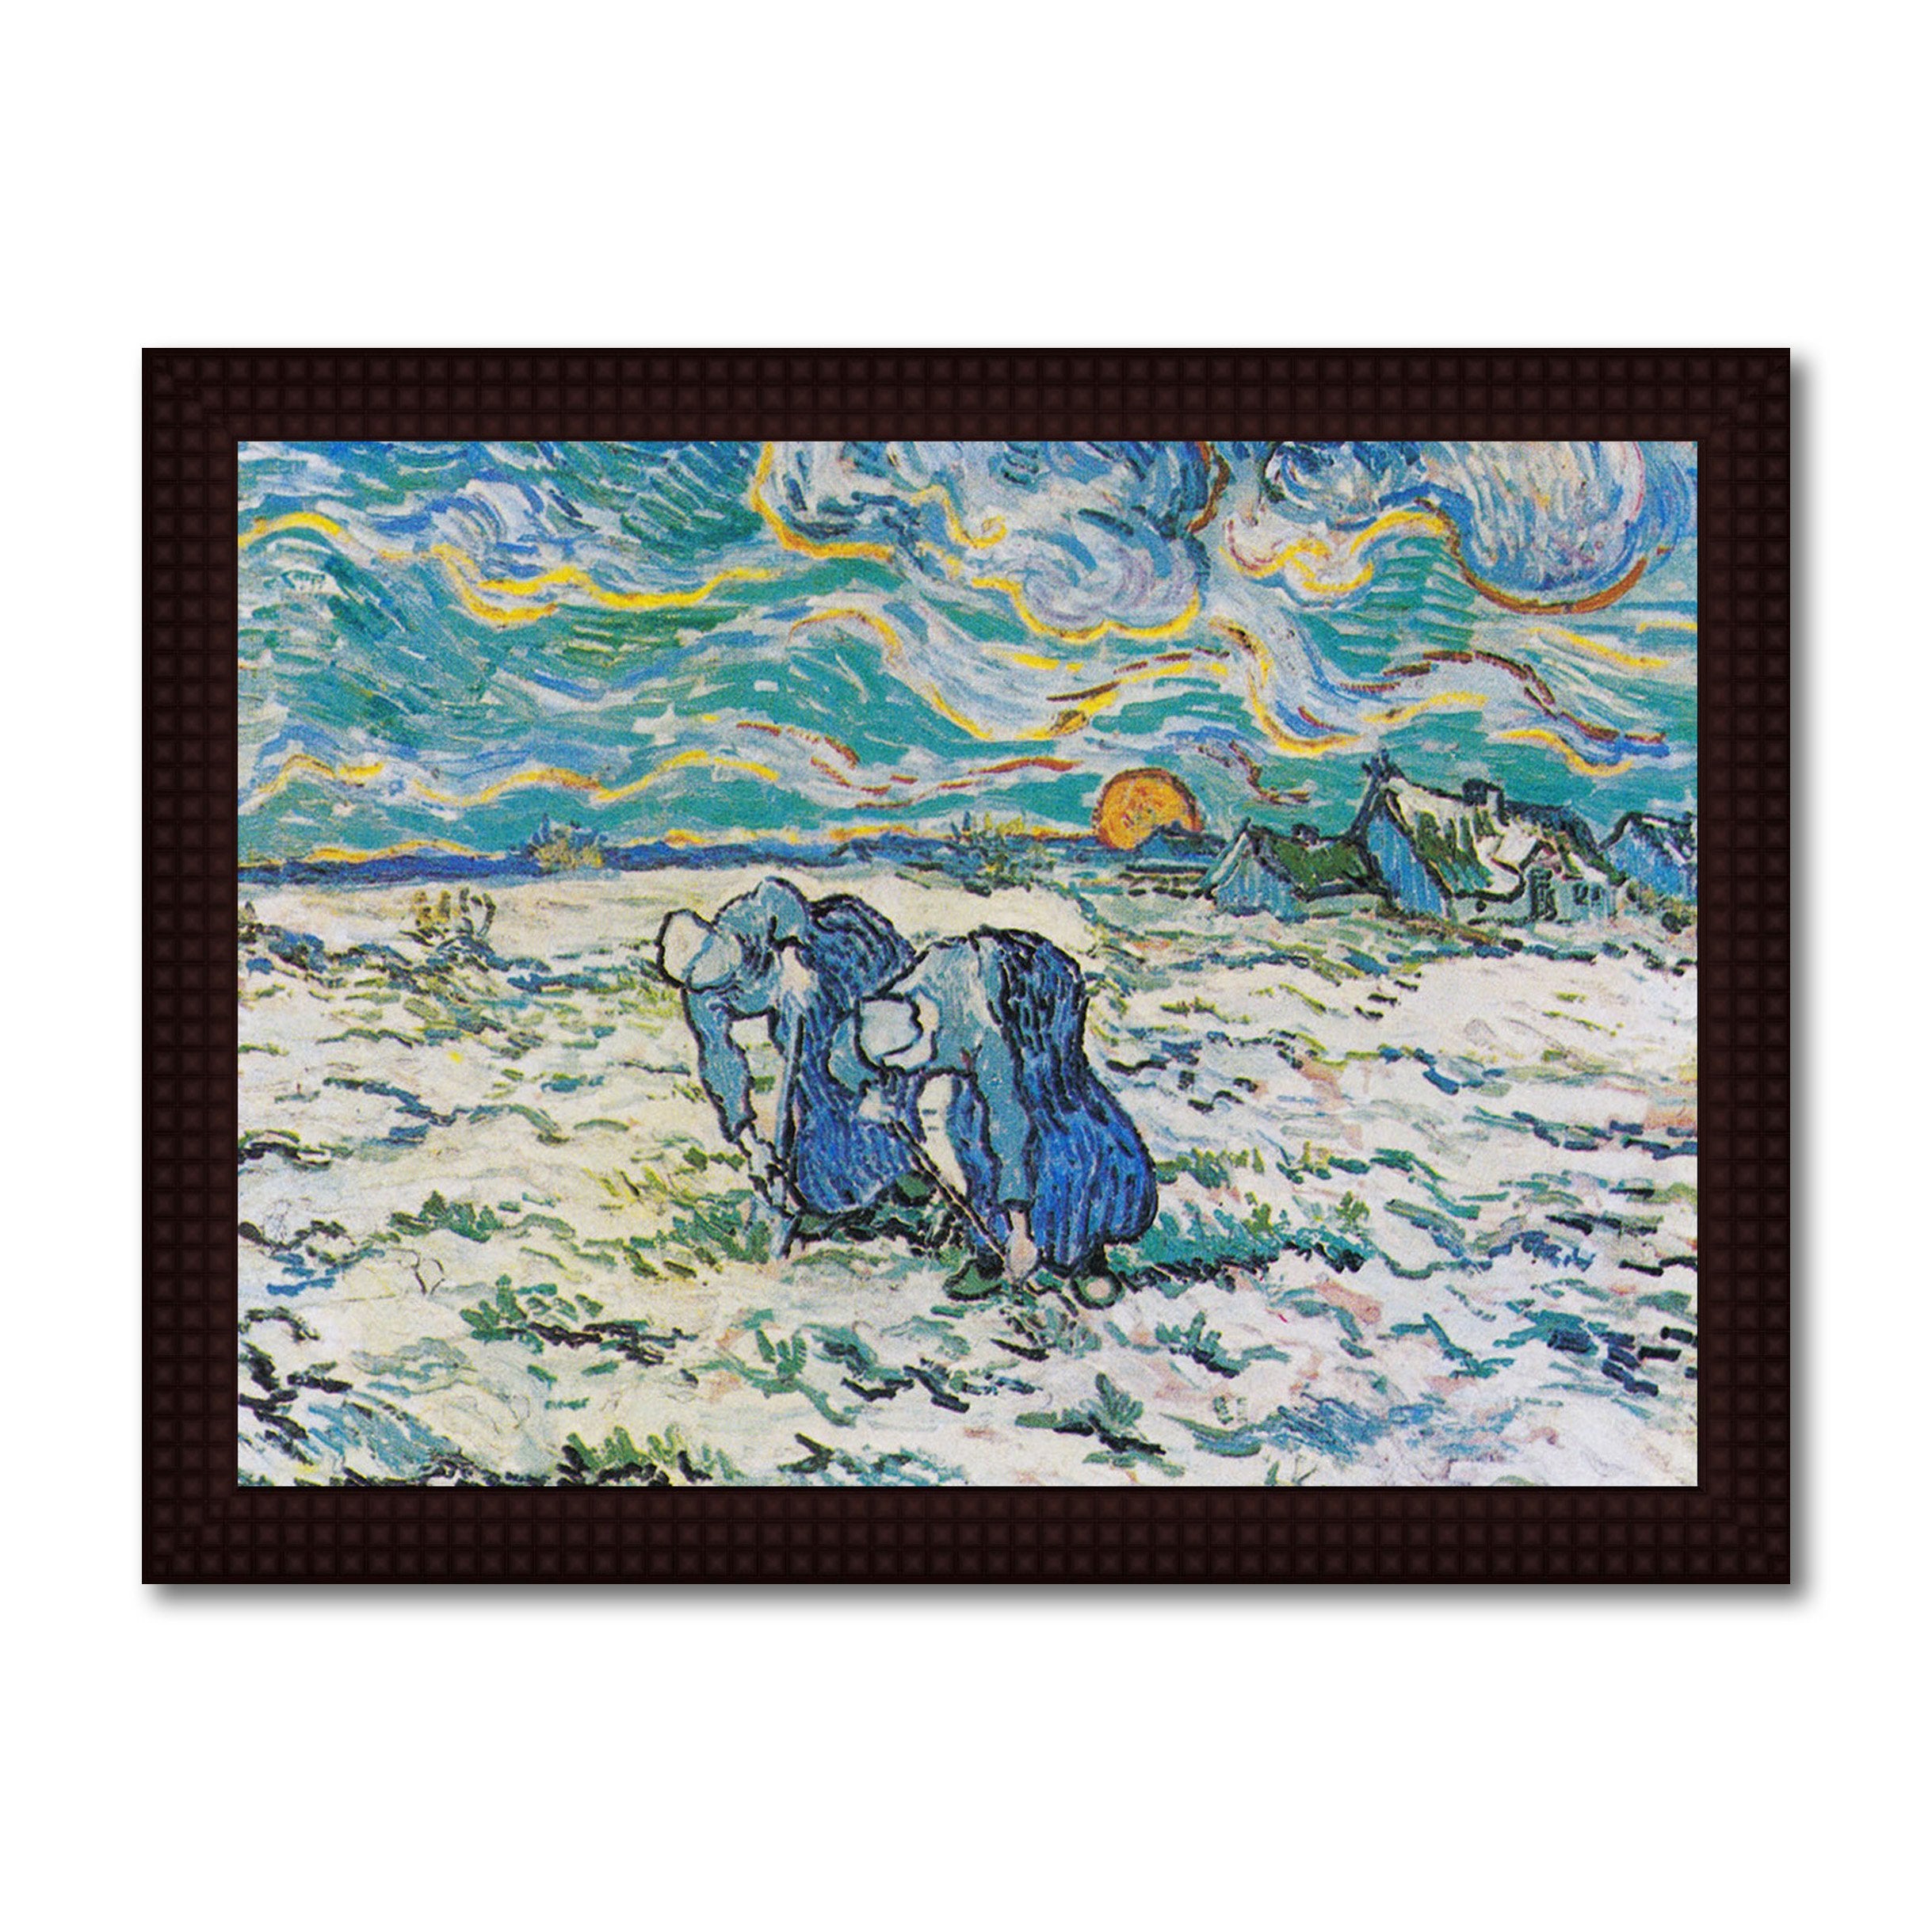 Two Peasant Women Digging in a Snow